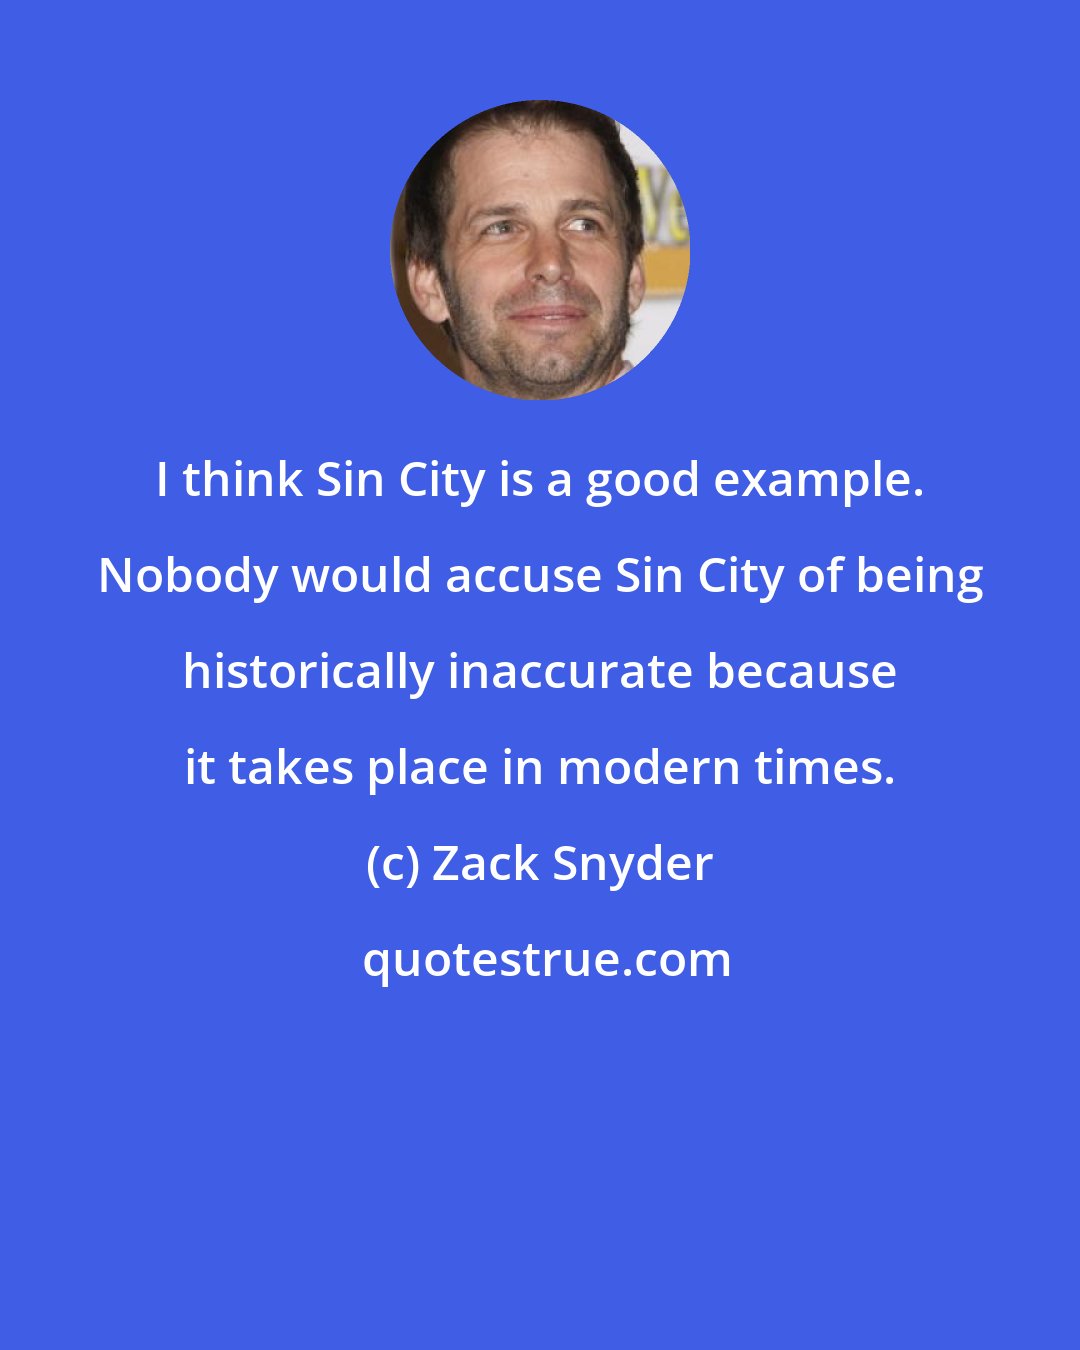 Zack Snyder: I think Sin City is a good example. Nobody would accuse Sin City of being historically inaccurate because it takes place in modern times.